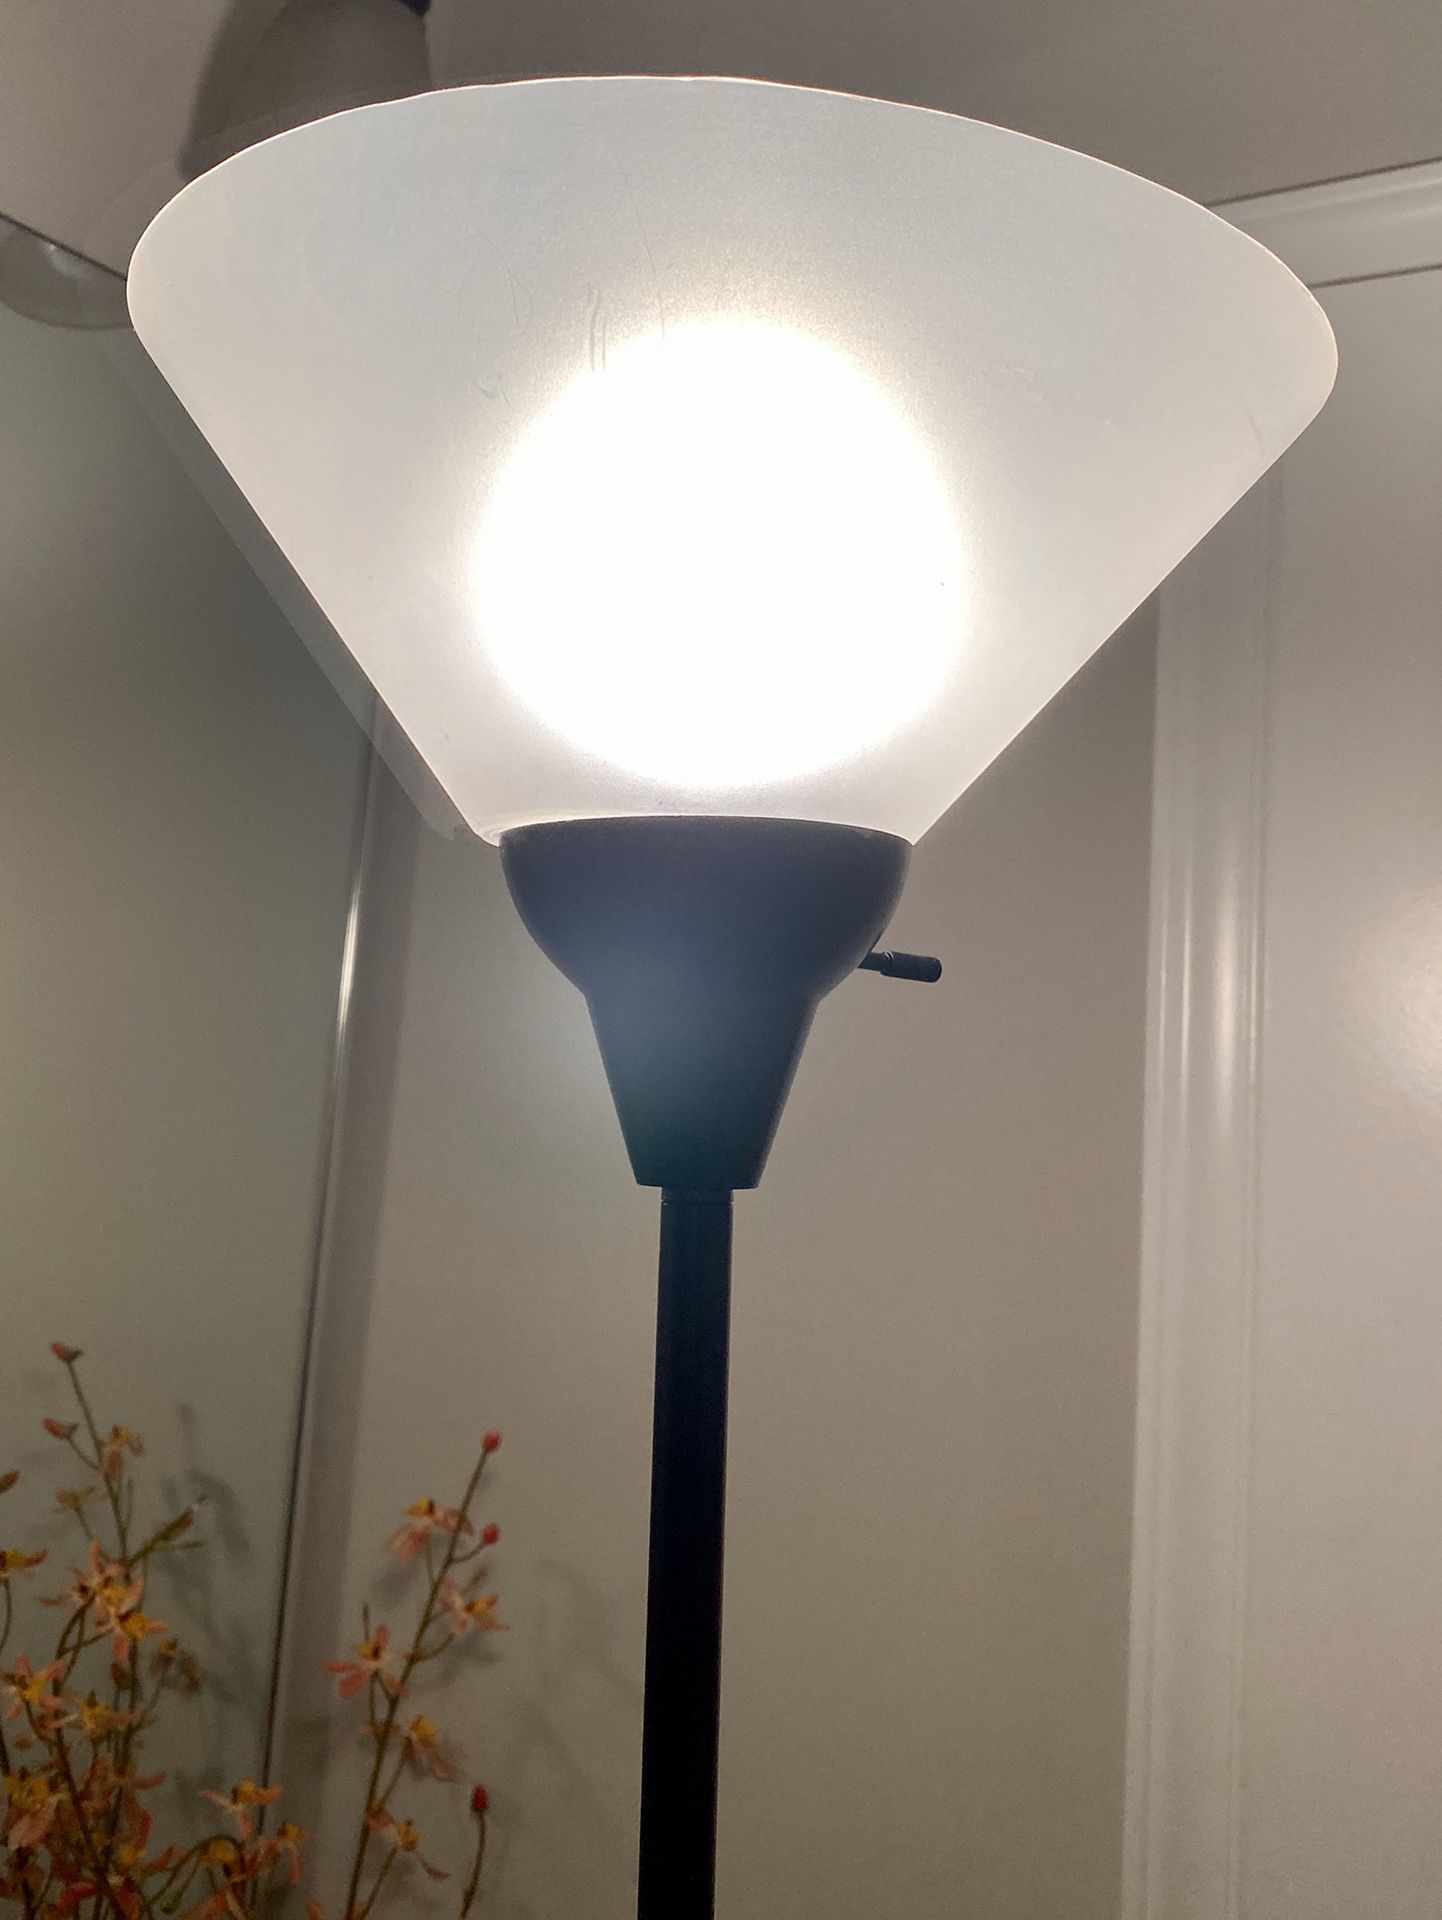 CHEAPER THAN WALLMART AND WITH FREE BULB !!! 71” Tall Metal Pole Pedestal Working Torchiere Floor Standing Lamp